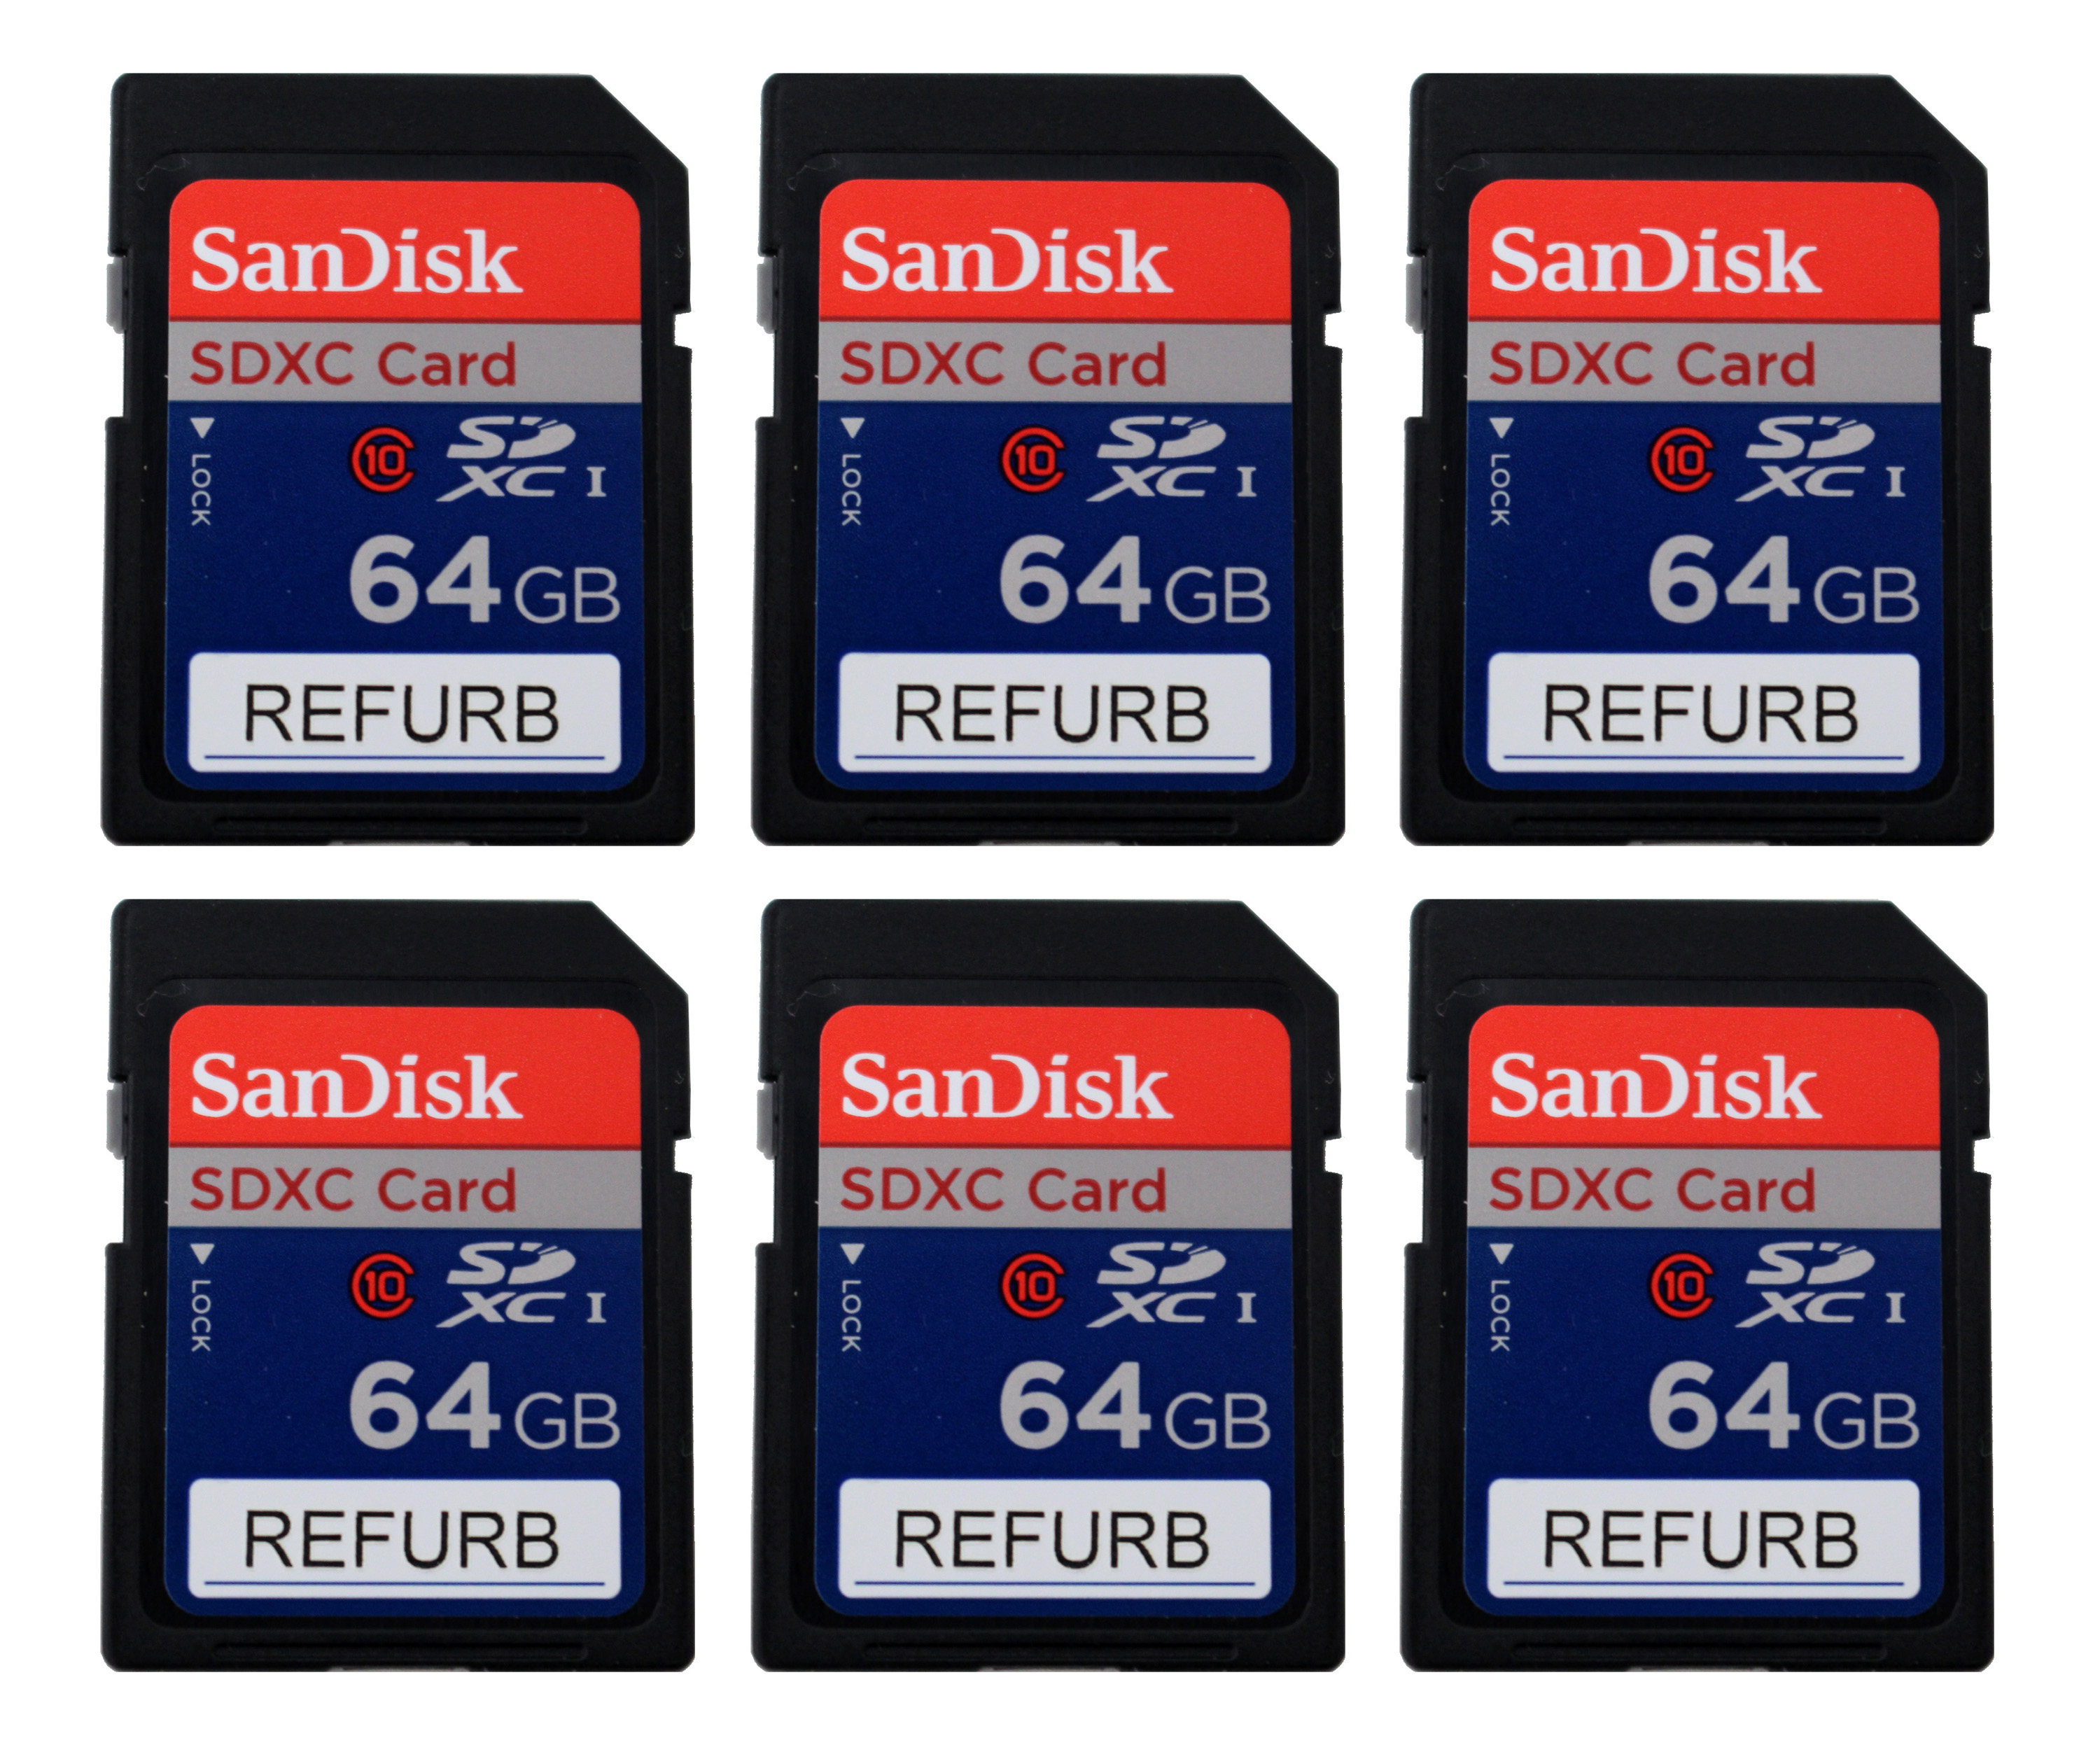 6-Pack SanDisk 64GB SDXC Card in Polycarbonate Carrying Case with BlueProton Lanyard (Refurbished)